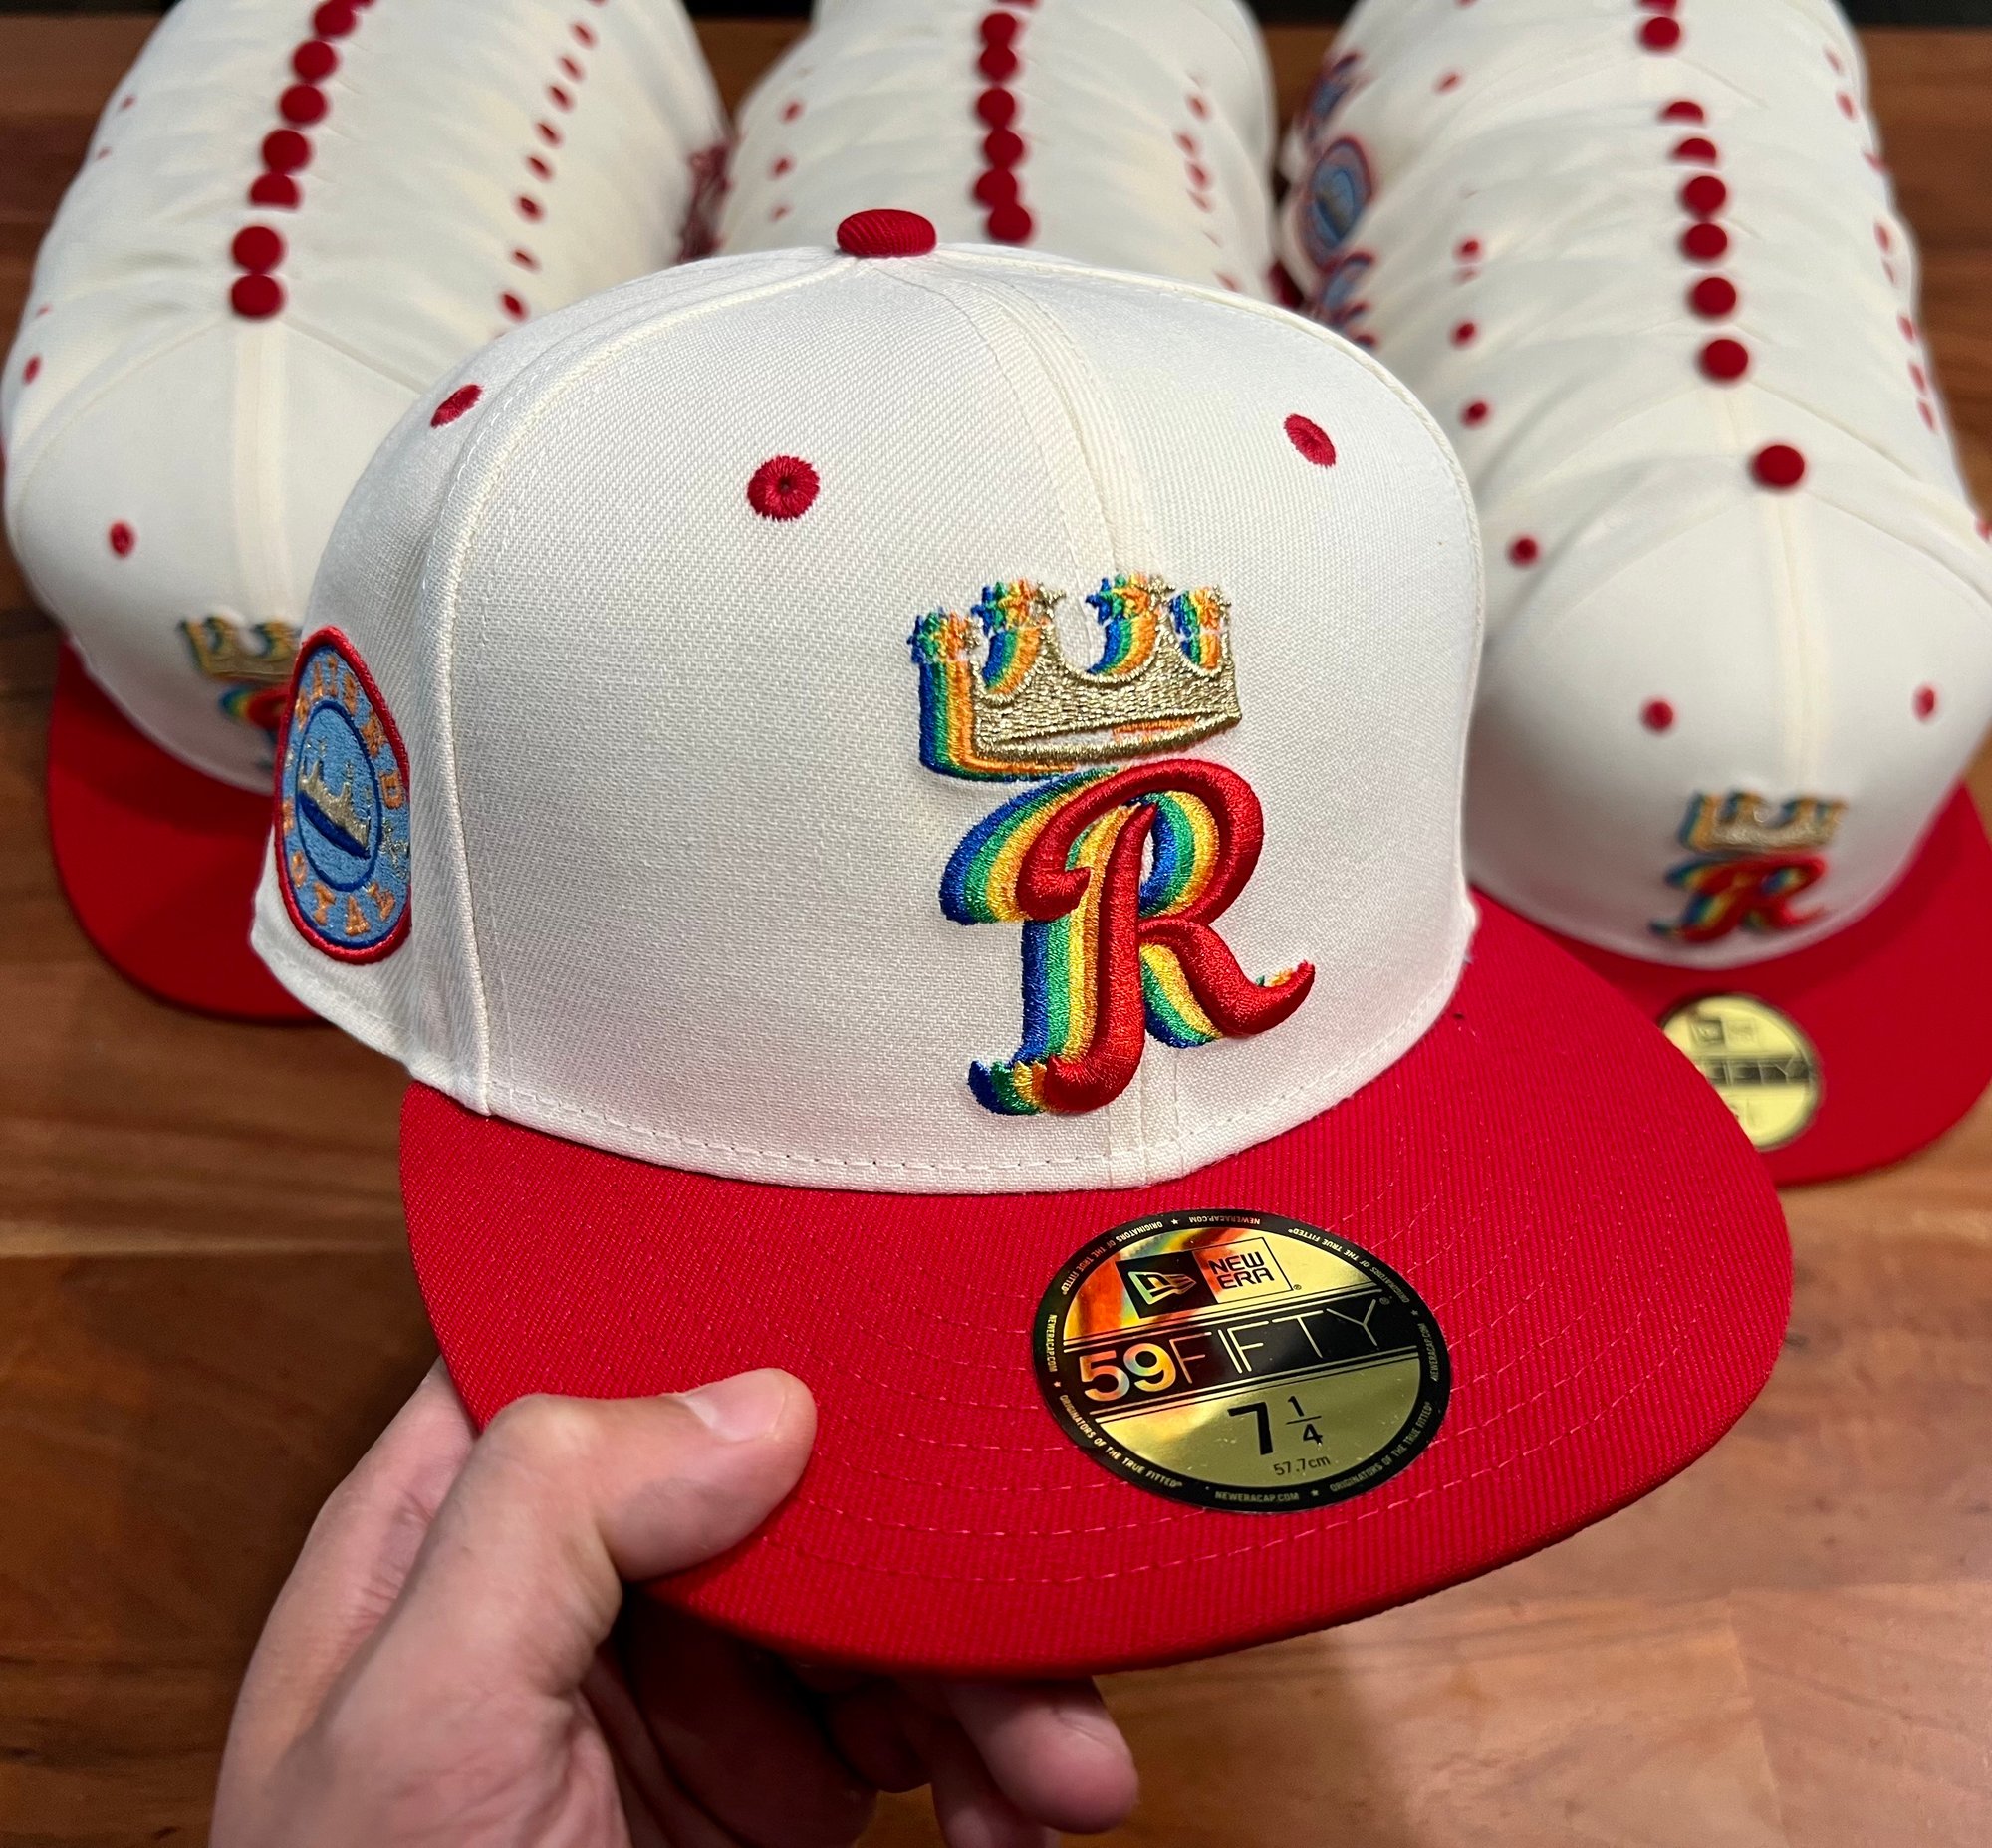 KC Royals x Reading Rainbow NE Fitted hat preorder by Fitted